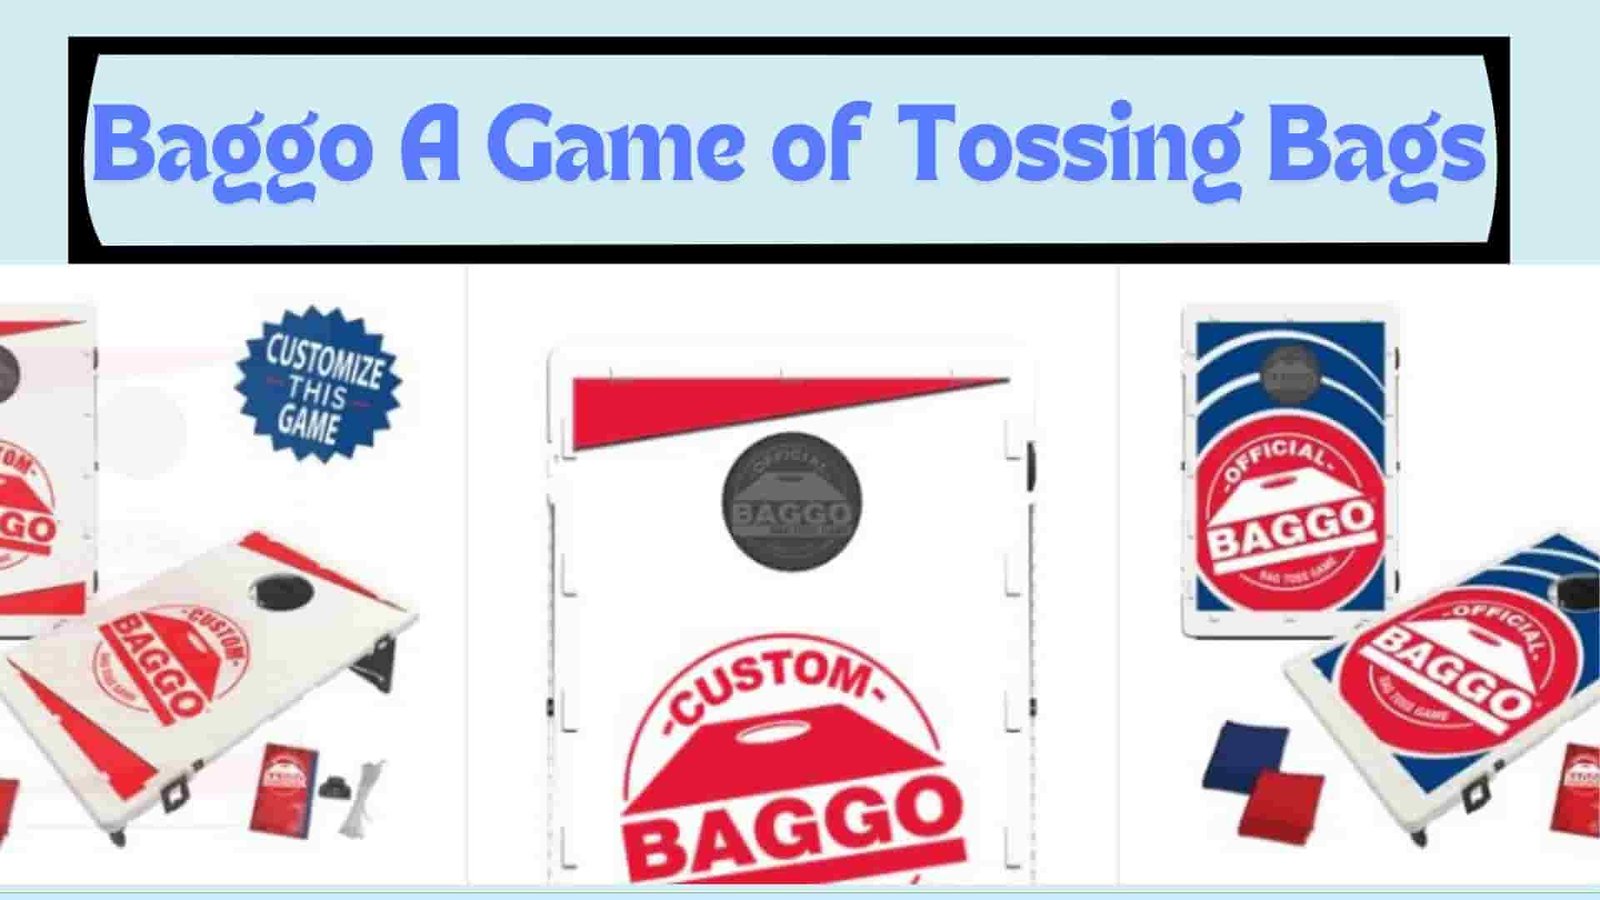 Baggo A Game of Tossing Bags